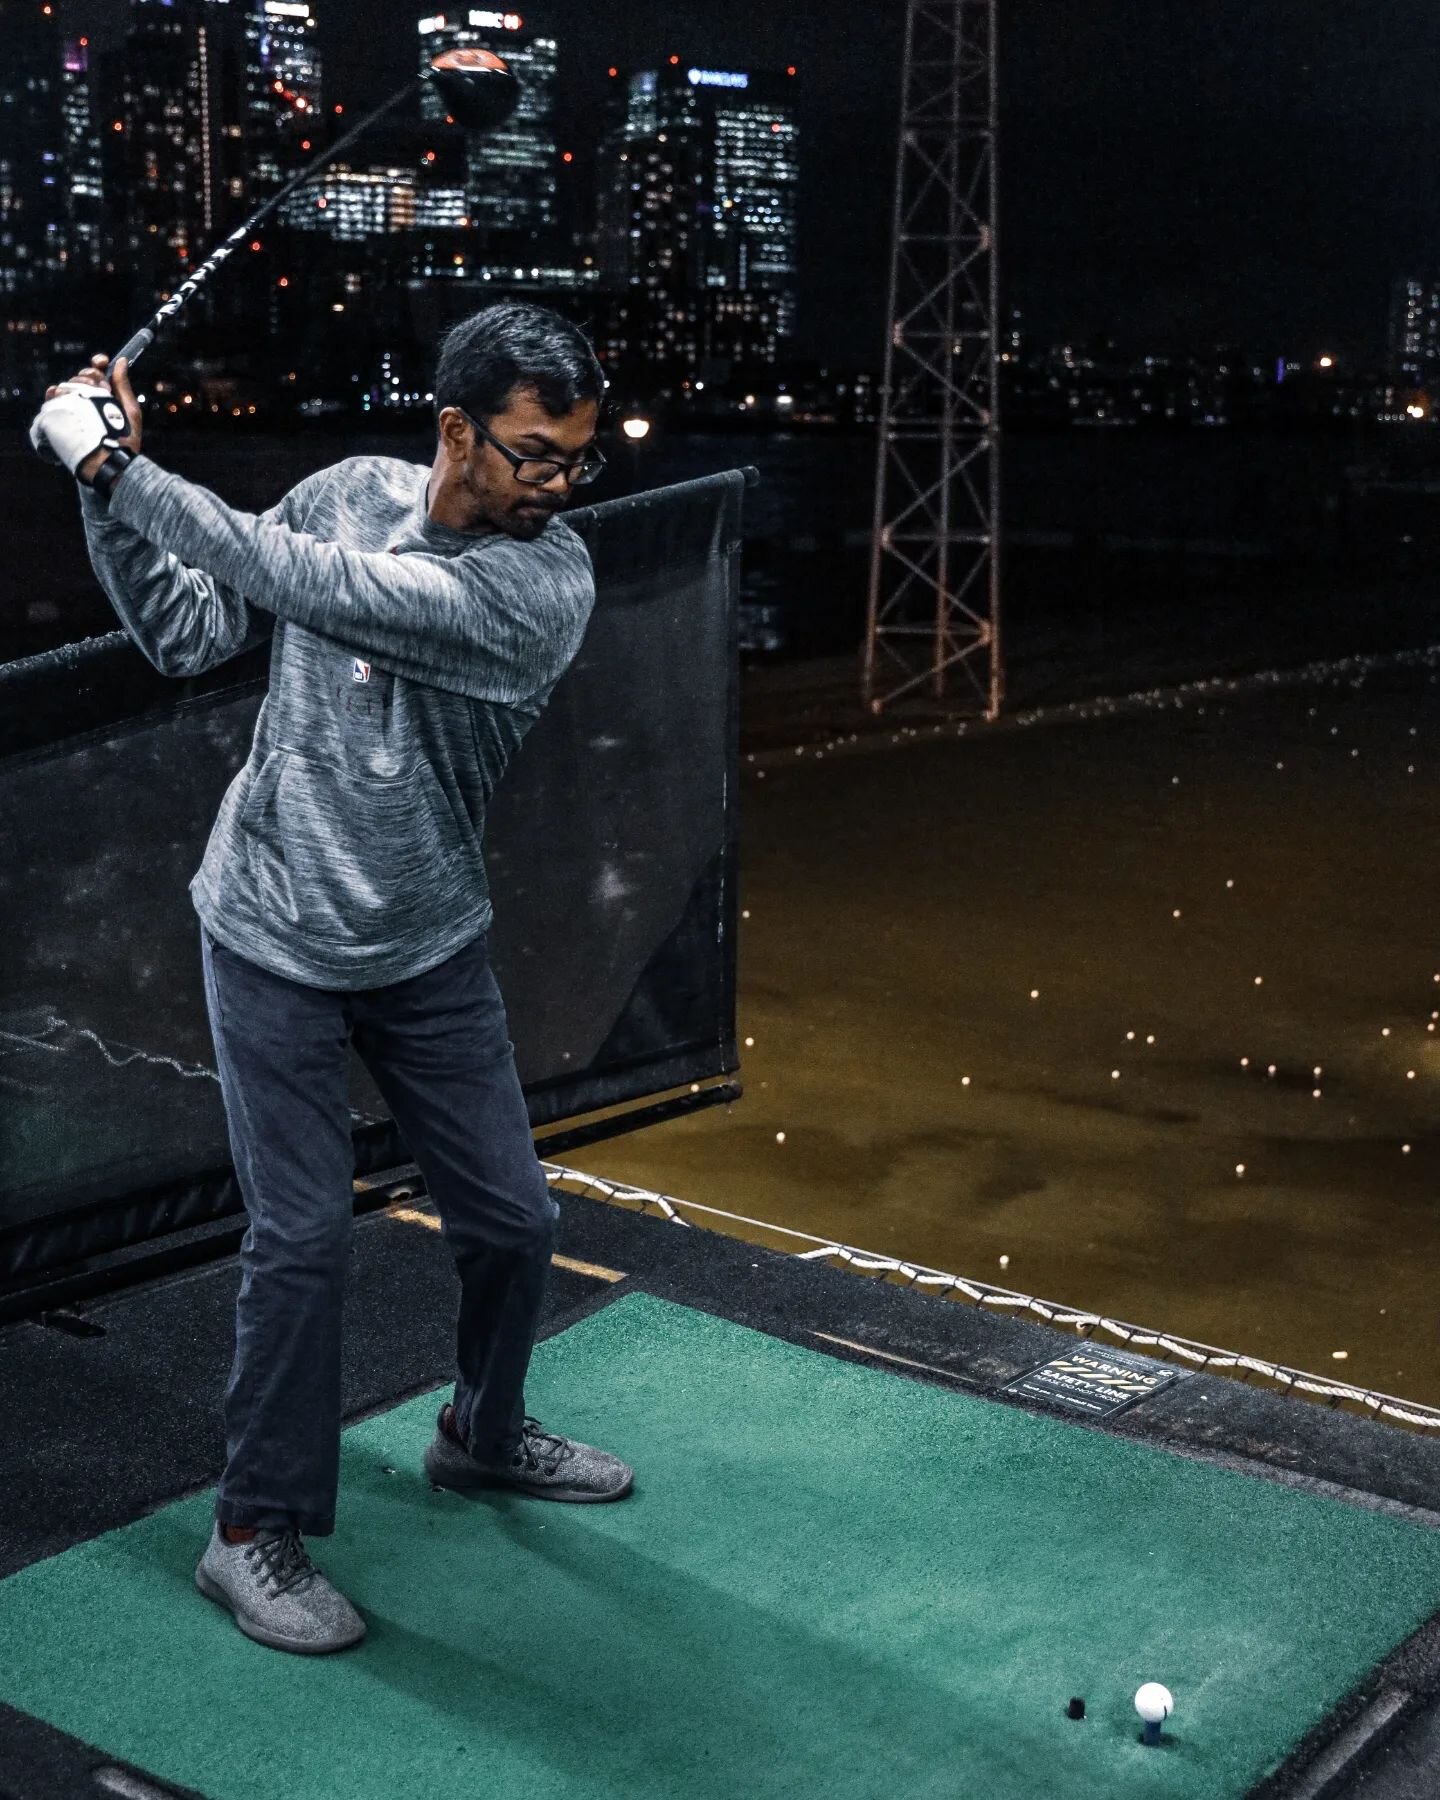 A few snappy snaps from yesterday's range session! I'm a big fan of simulators, but personally the range just hits different!

#thegolfguy #drivingrange #randomgolfclub #london #londongolf #golfphoto #golfswag #greenwichpeninsula #taylormadegolf #the